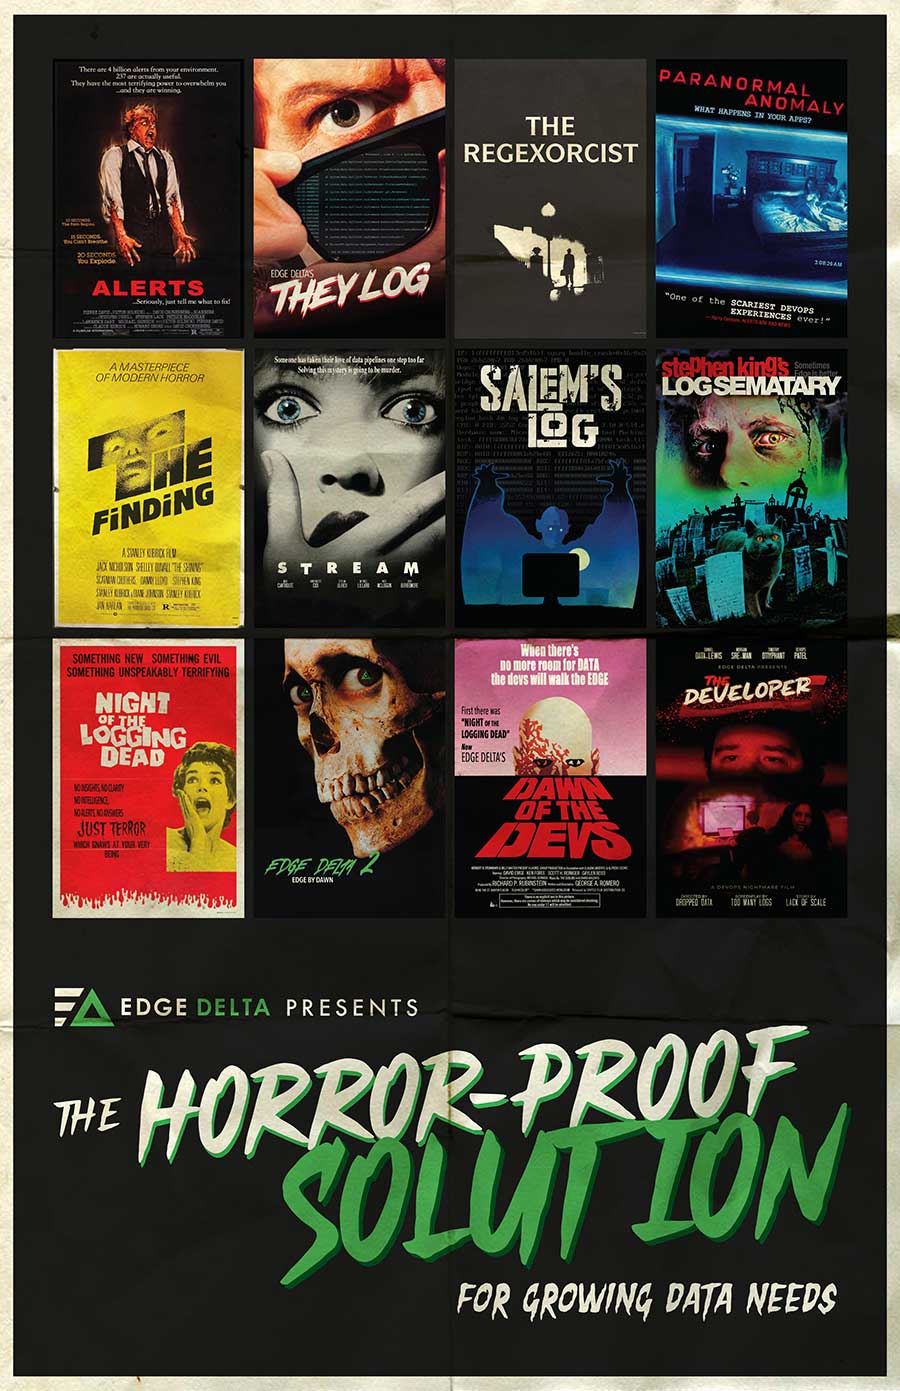 Movie poster - The Horror-Proof Solution